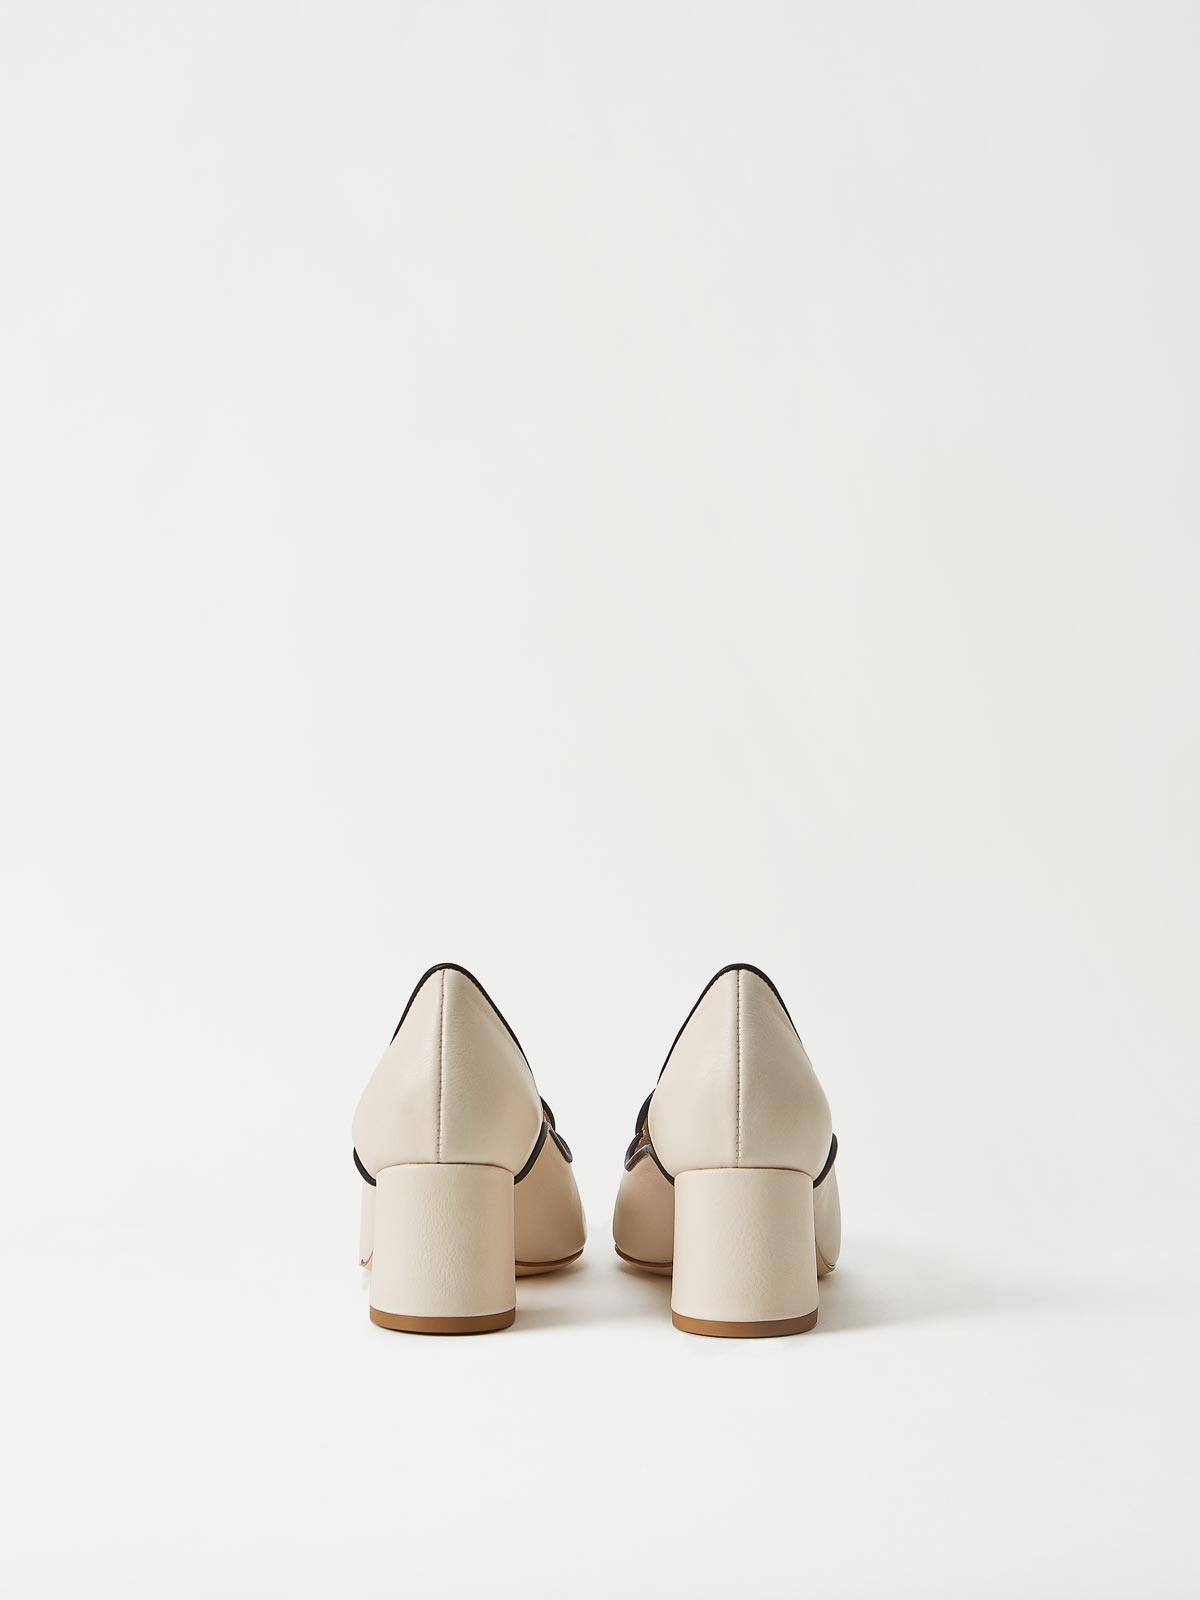 A Pair of Mavette Fiona Loafers Ivory Back View